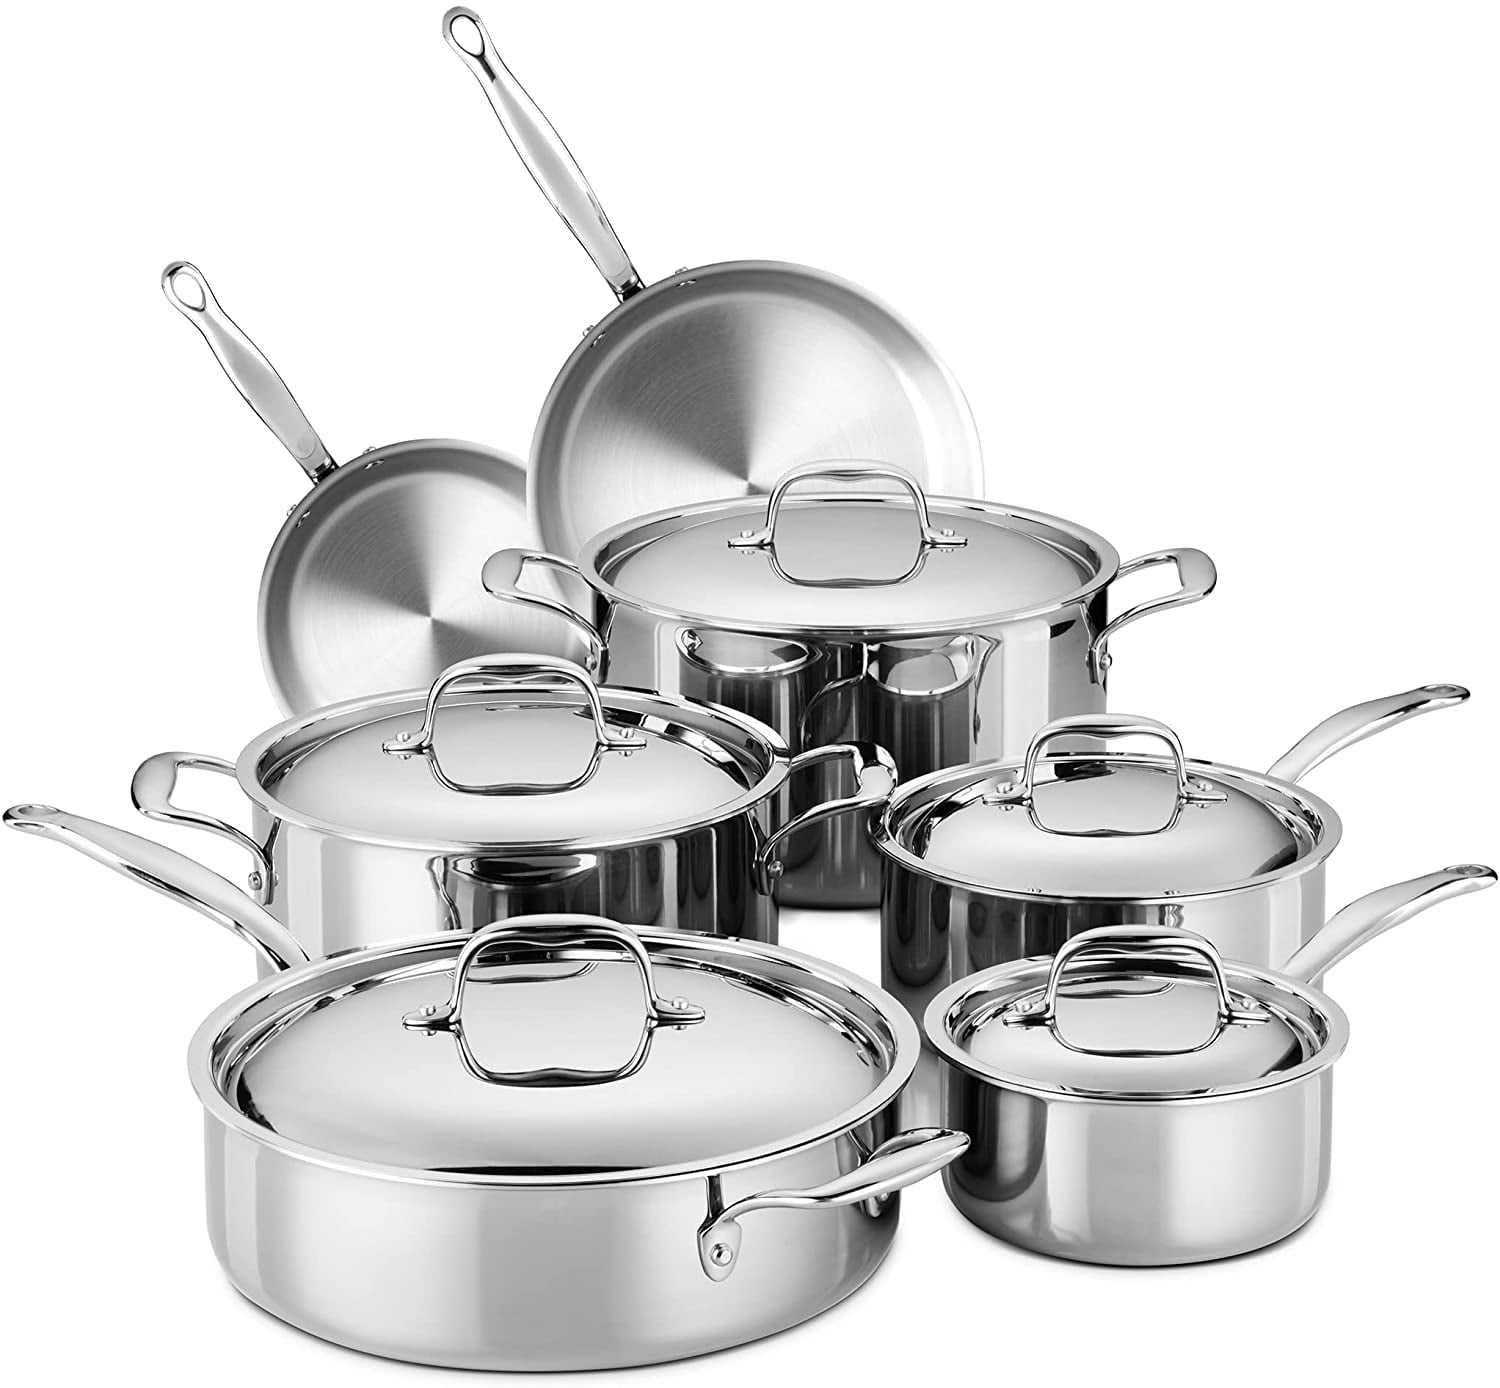  Legend 3 Ply 10 pc Stainless Steel Pots & Pans Set, Professional Quality Cookware Clad for Home Cooking & Commercial Kitchen  Surface Induction & Oven Safe